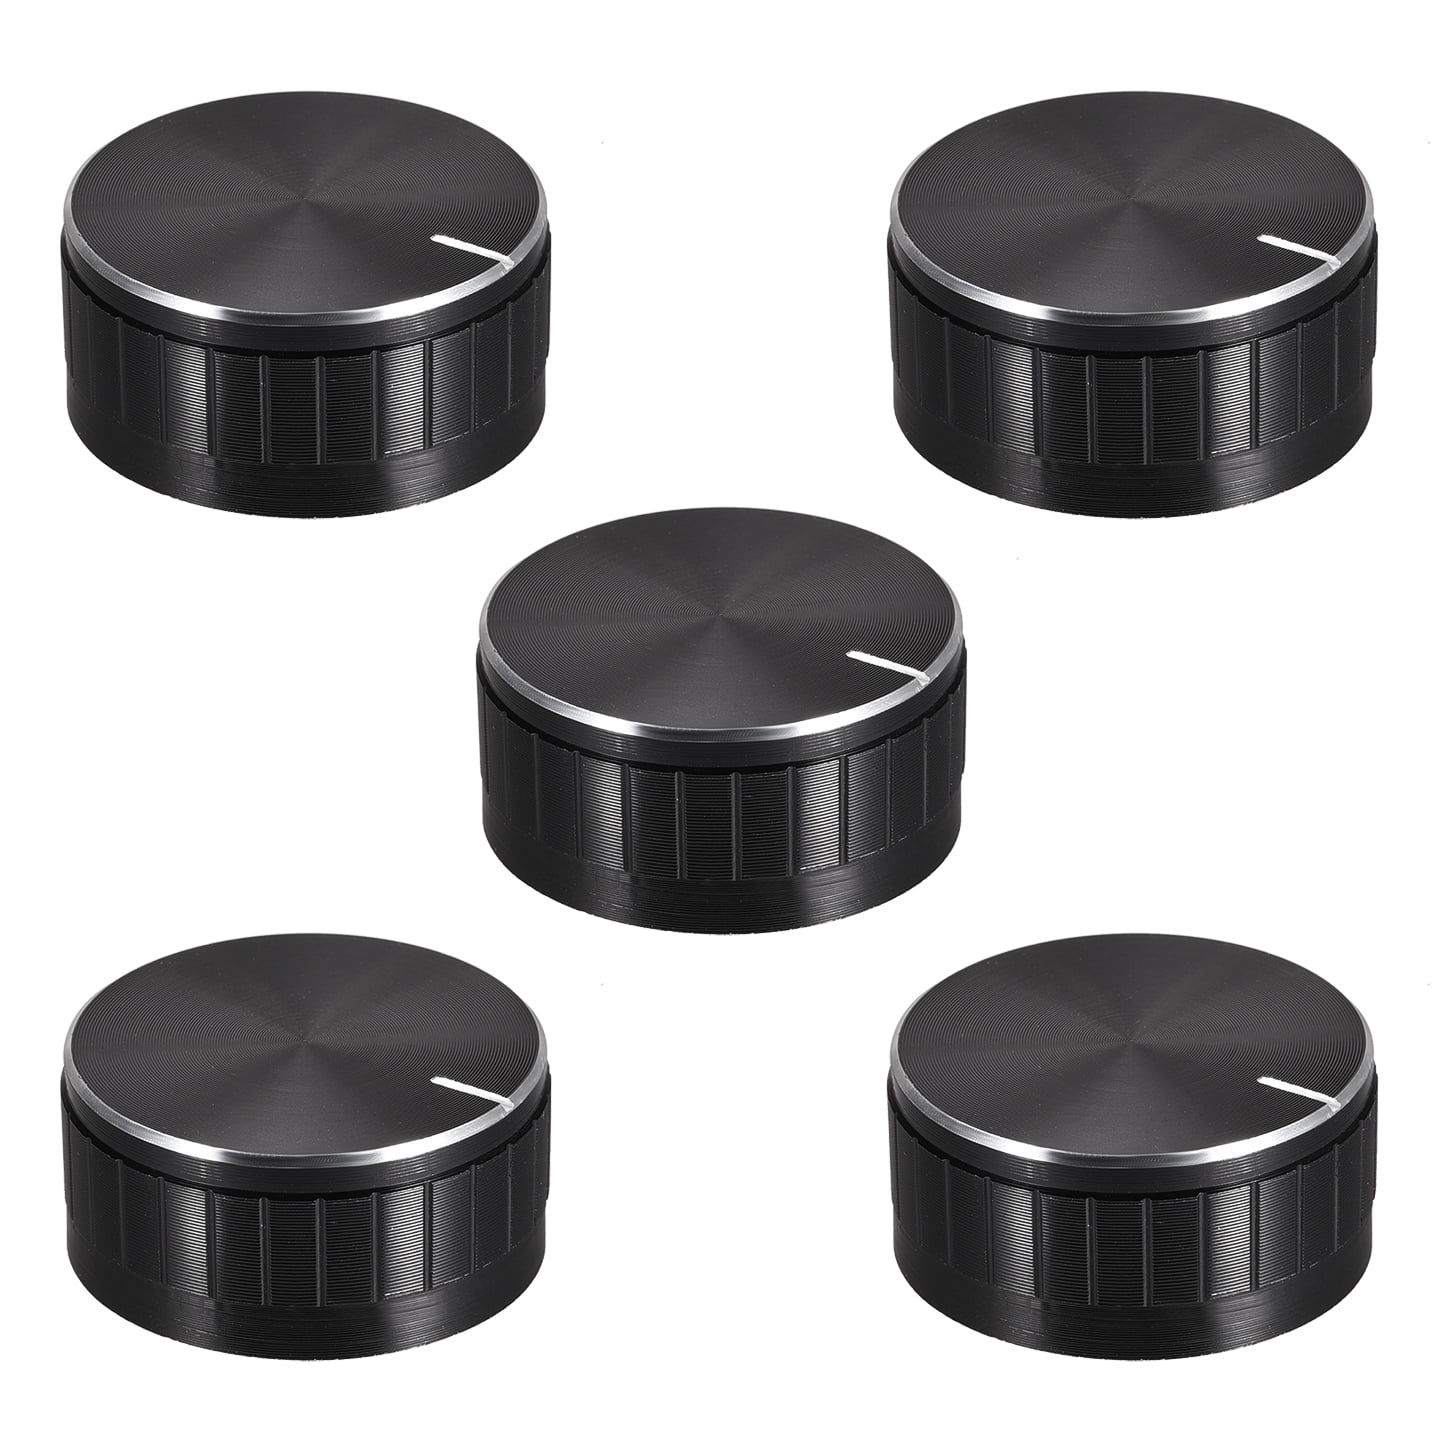 5set Black Rotary Potentiometer Knobs Caps with 5Pcs Counting Dial 0-100 Scal JX 